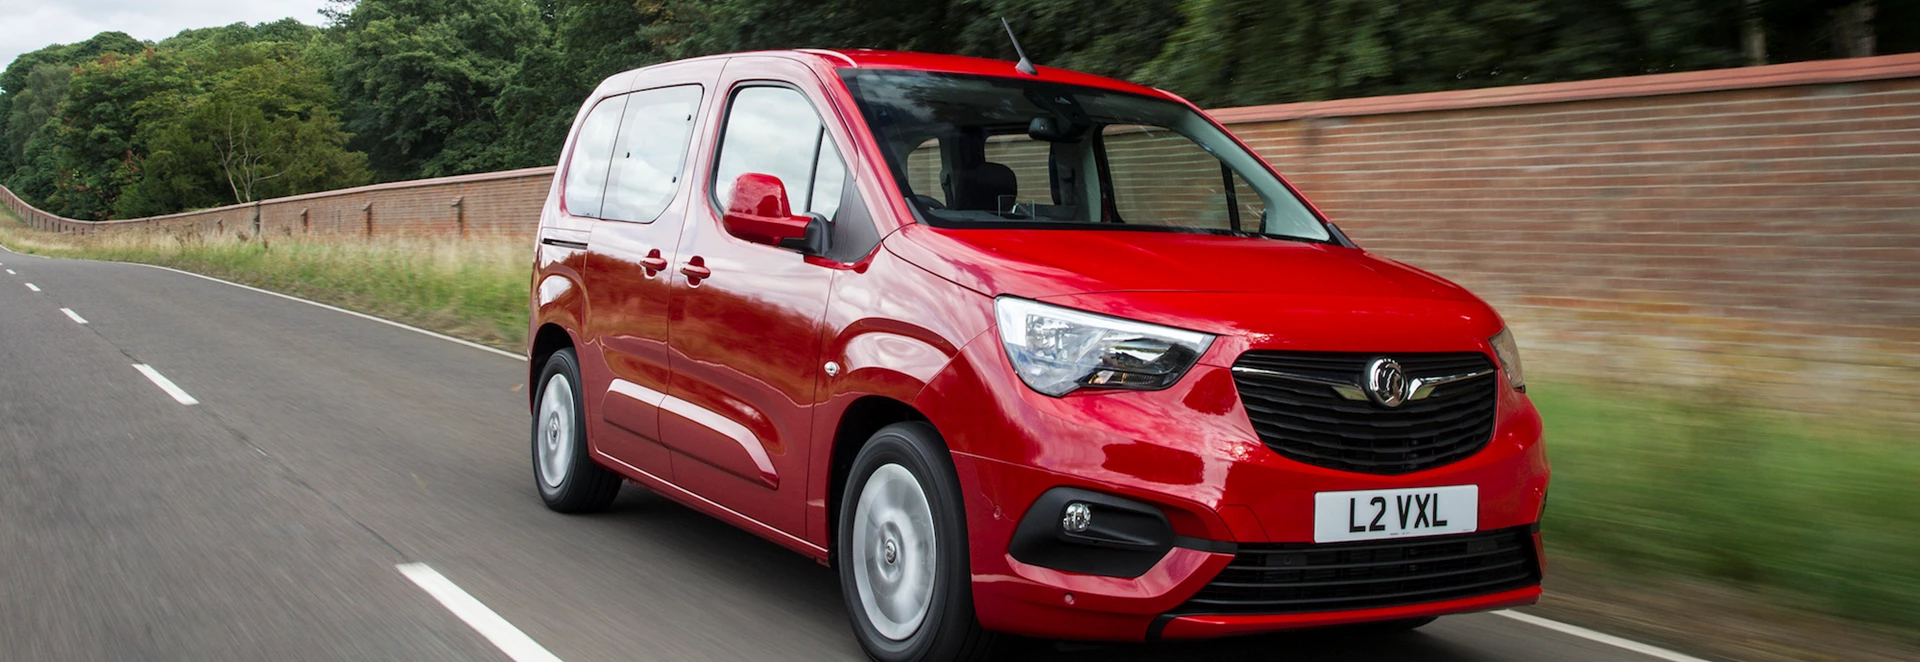 New 2018 Vauxhall Combo pricing revealed